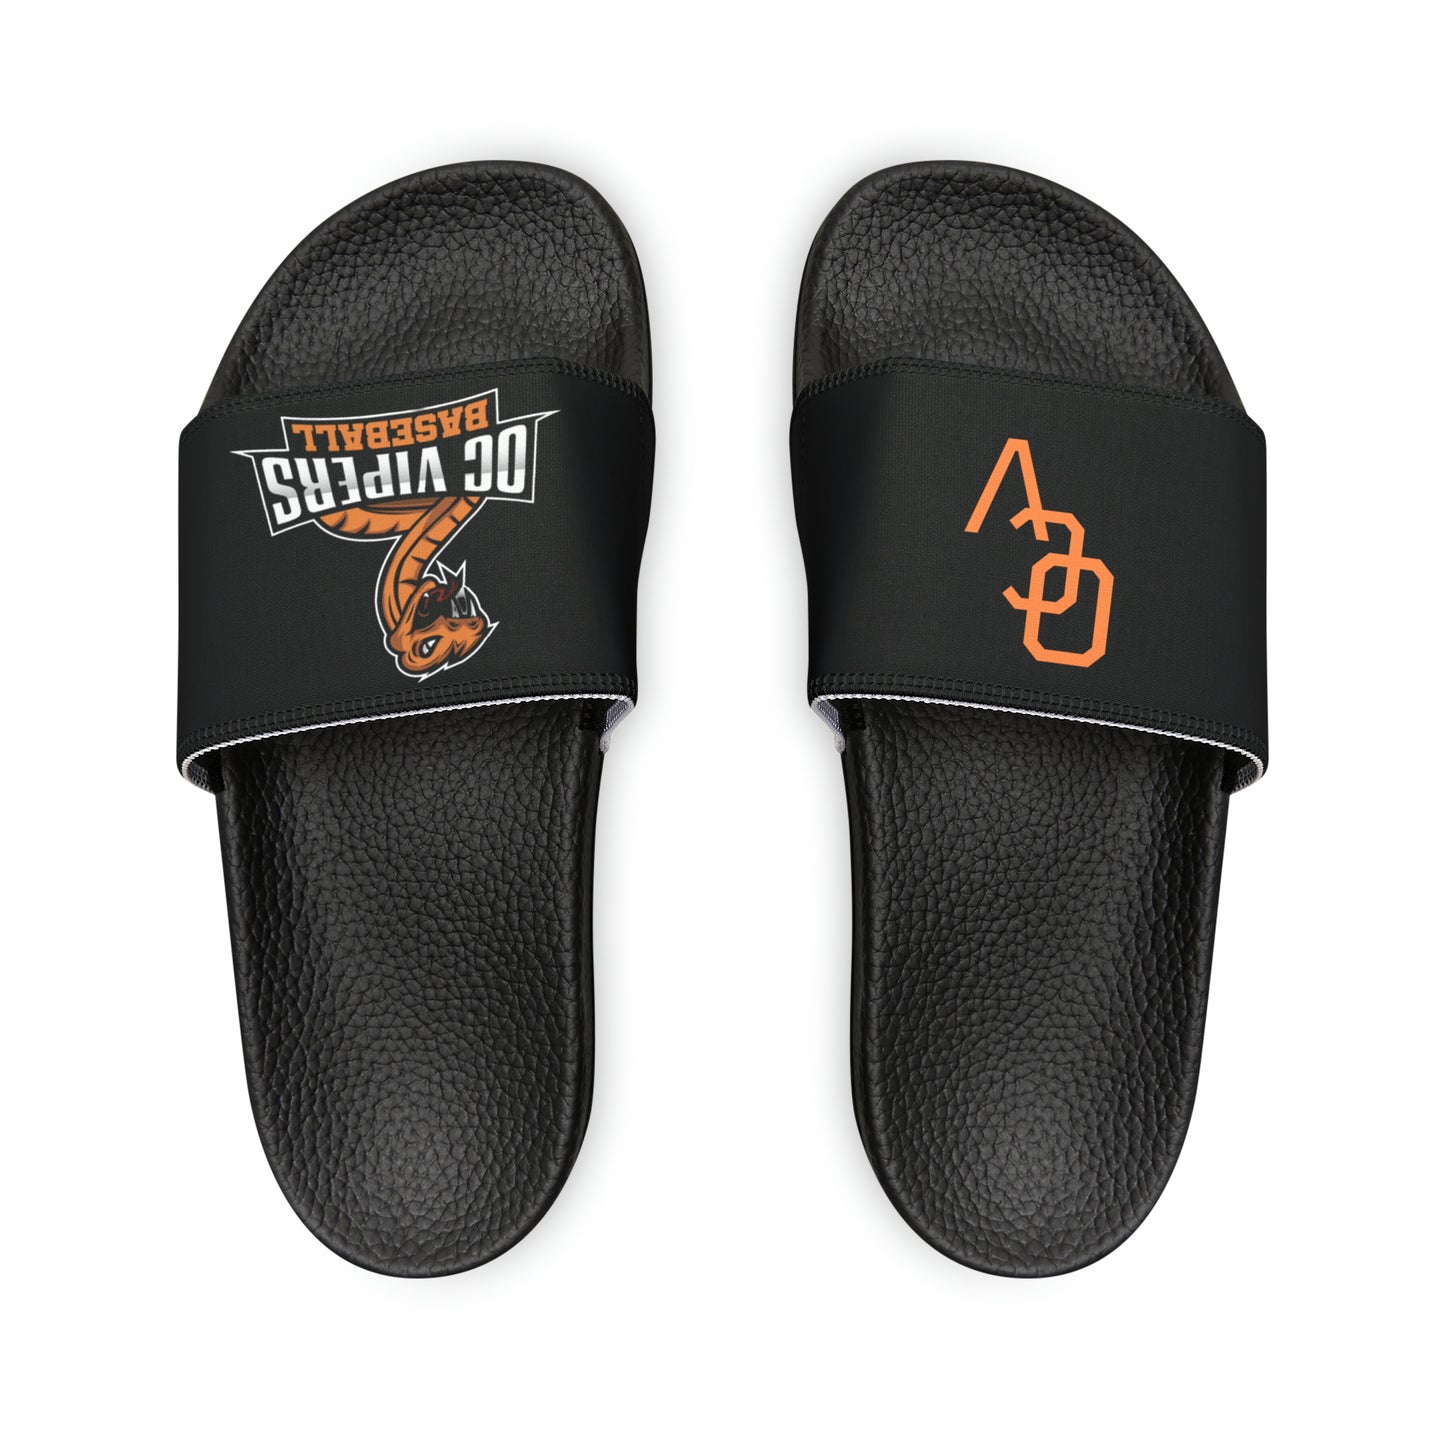 Black Vipers Youth PU Slide Sandals